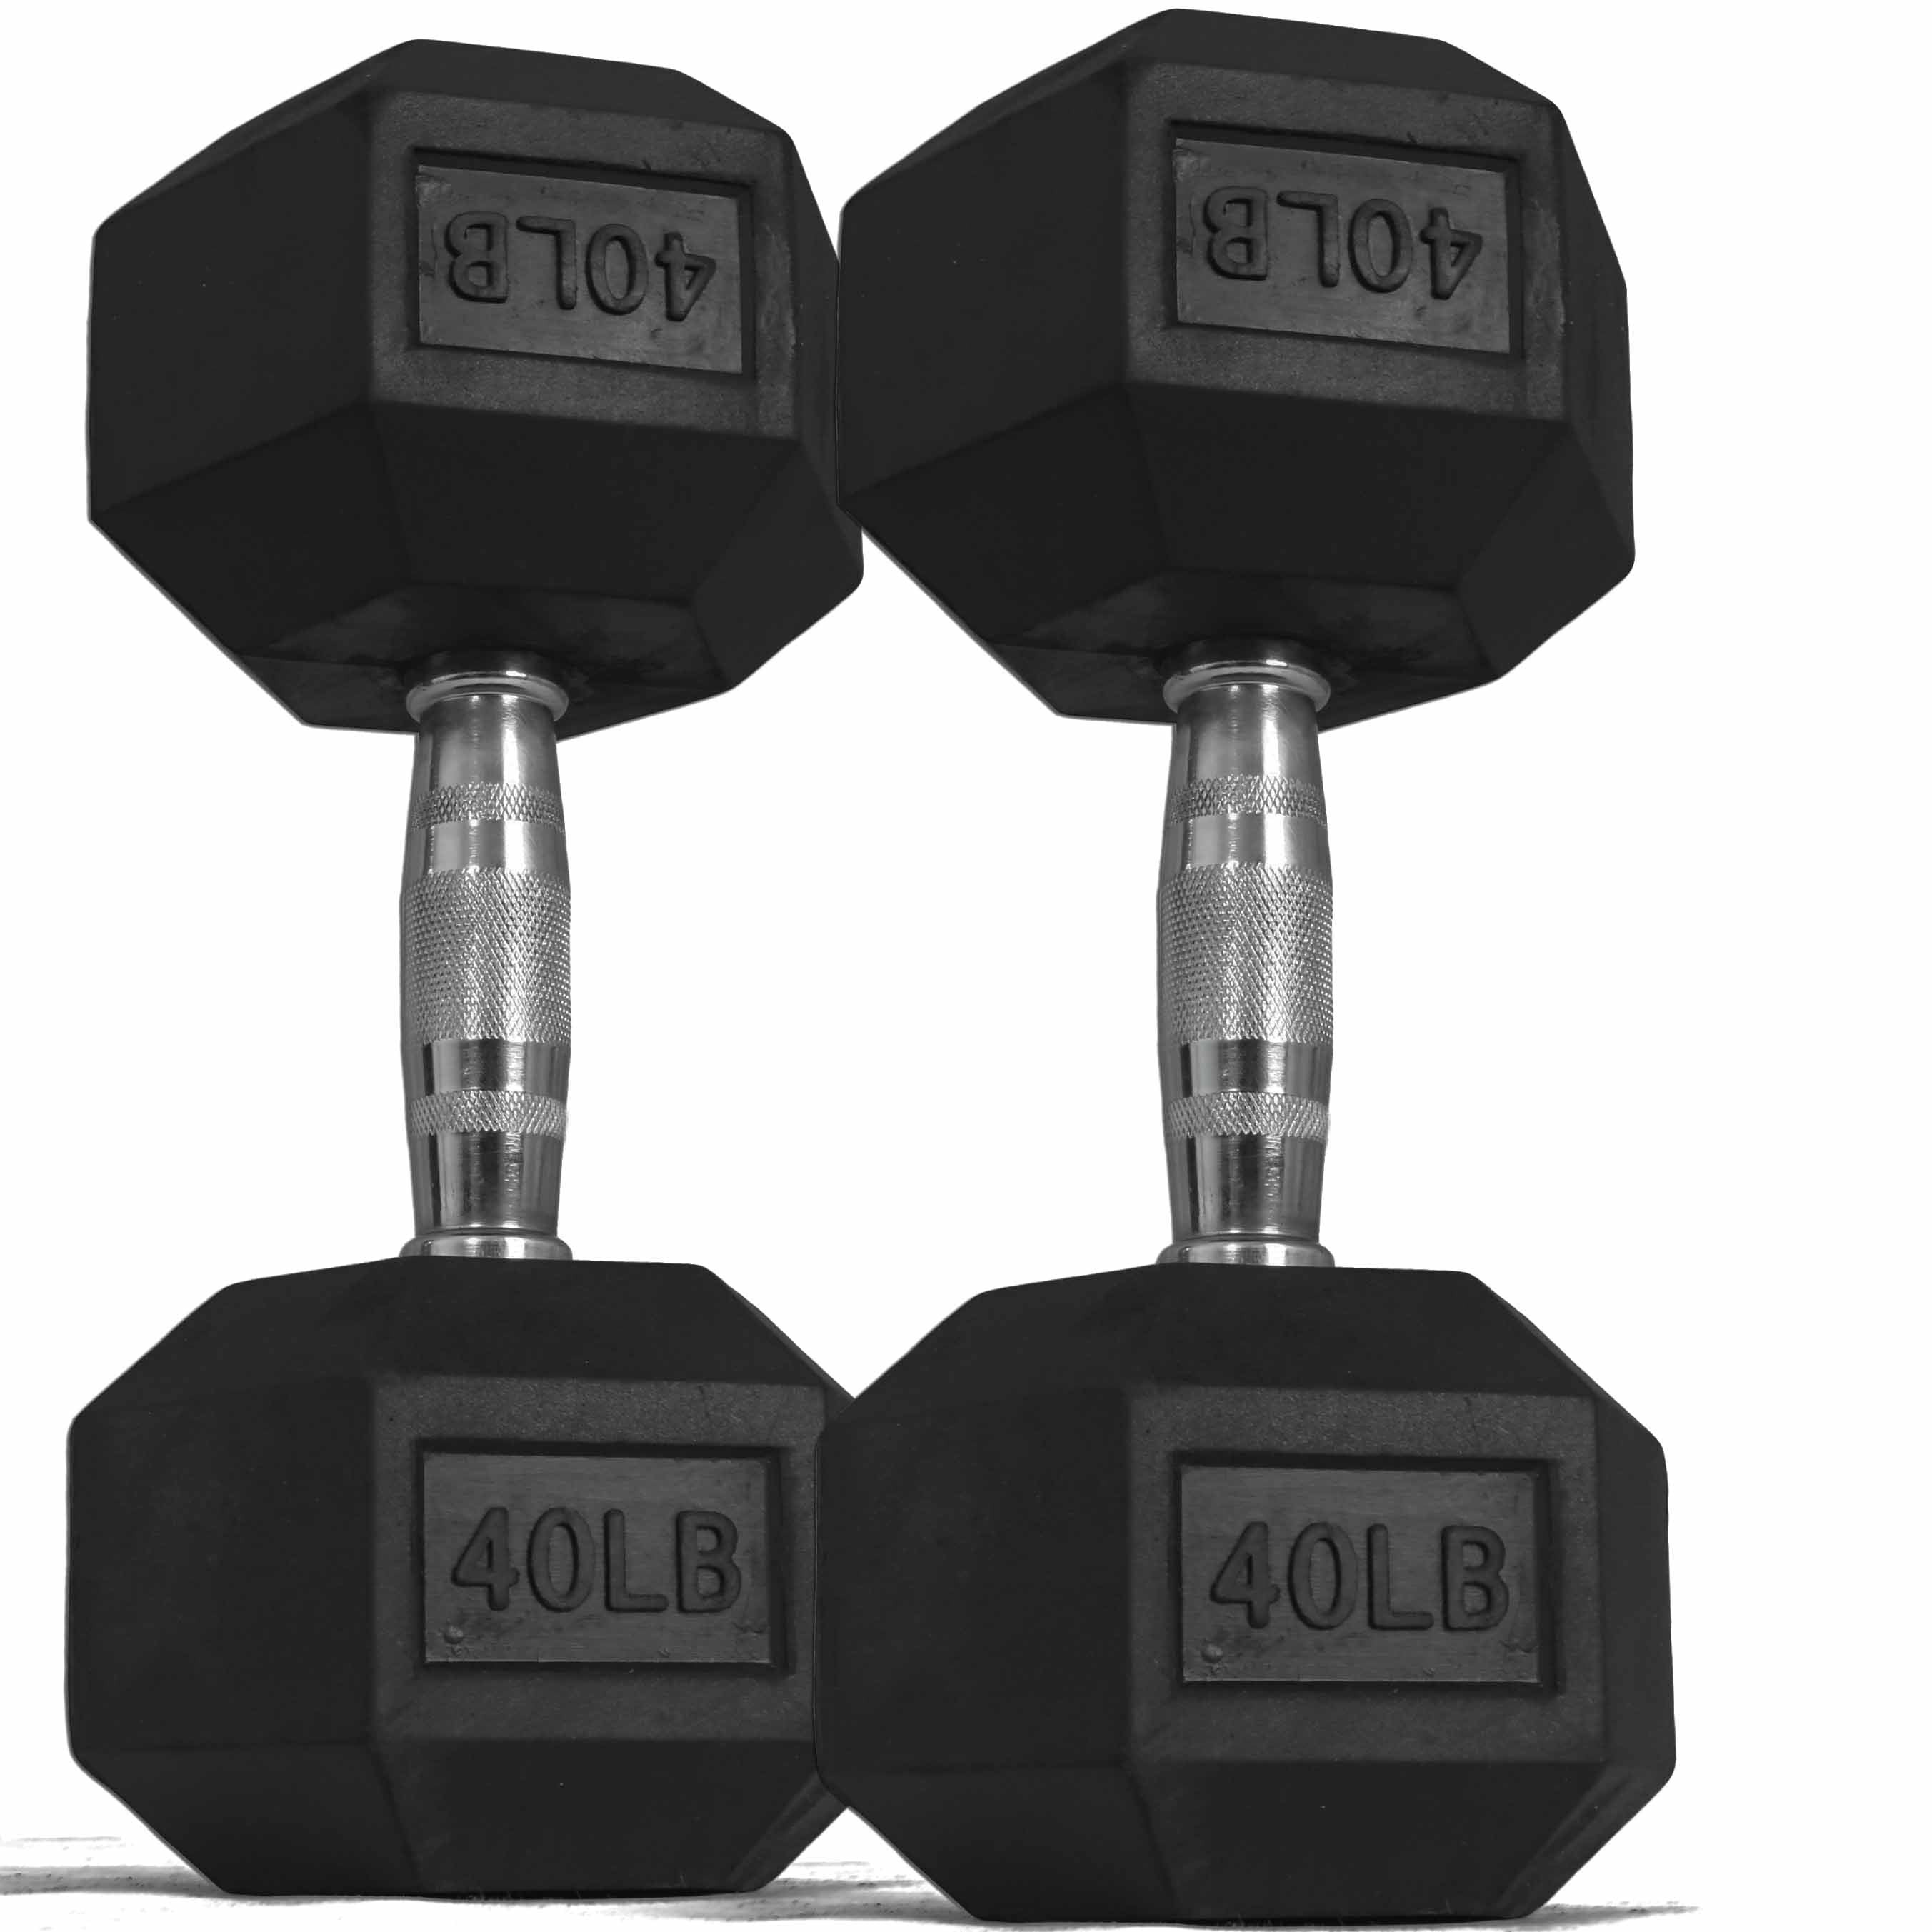 Pair of Black Rubber Coated Hex Dumbbells Iron Metal Home Workout 40 lb x 2